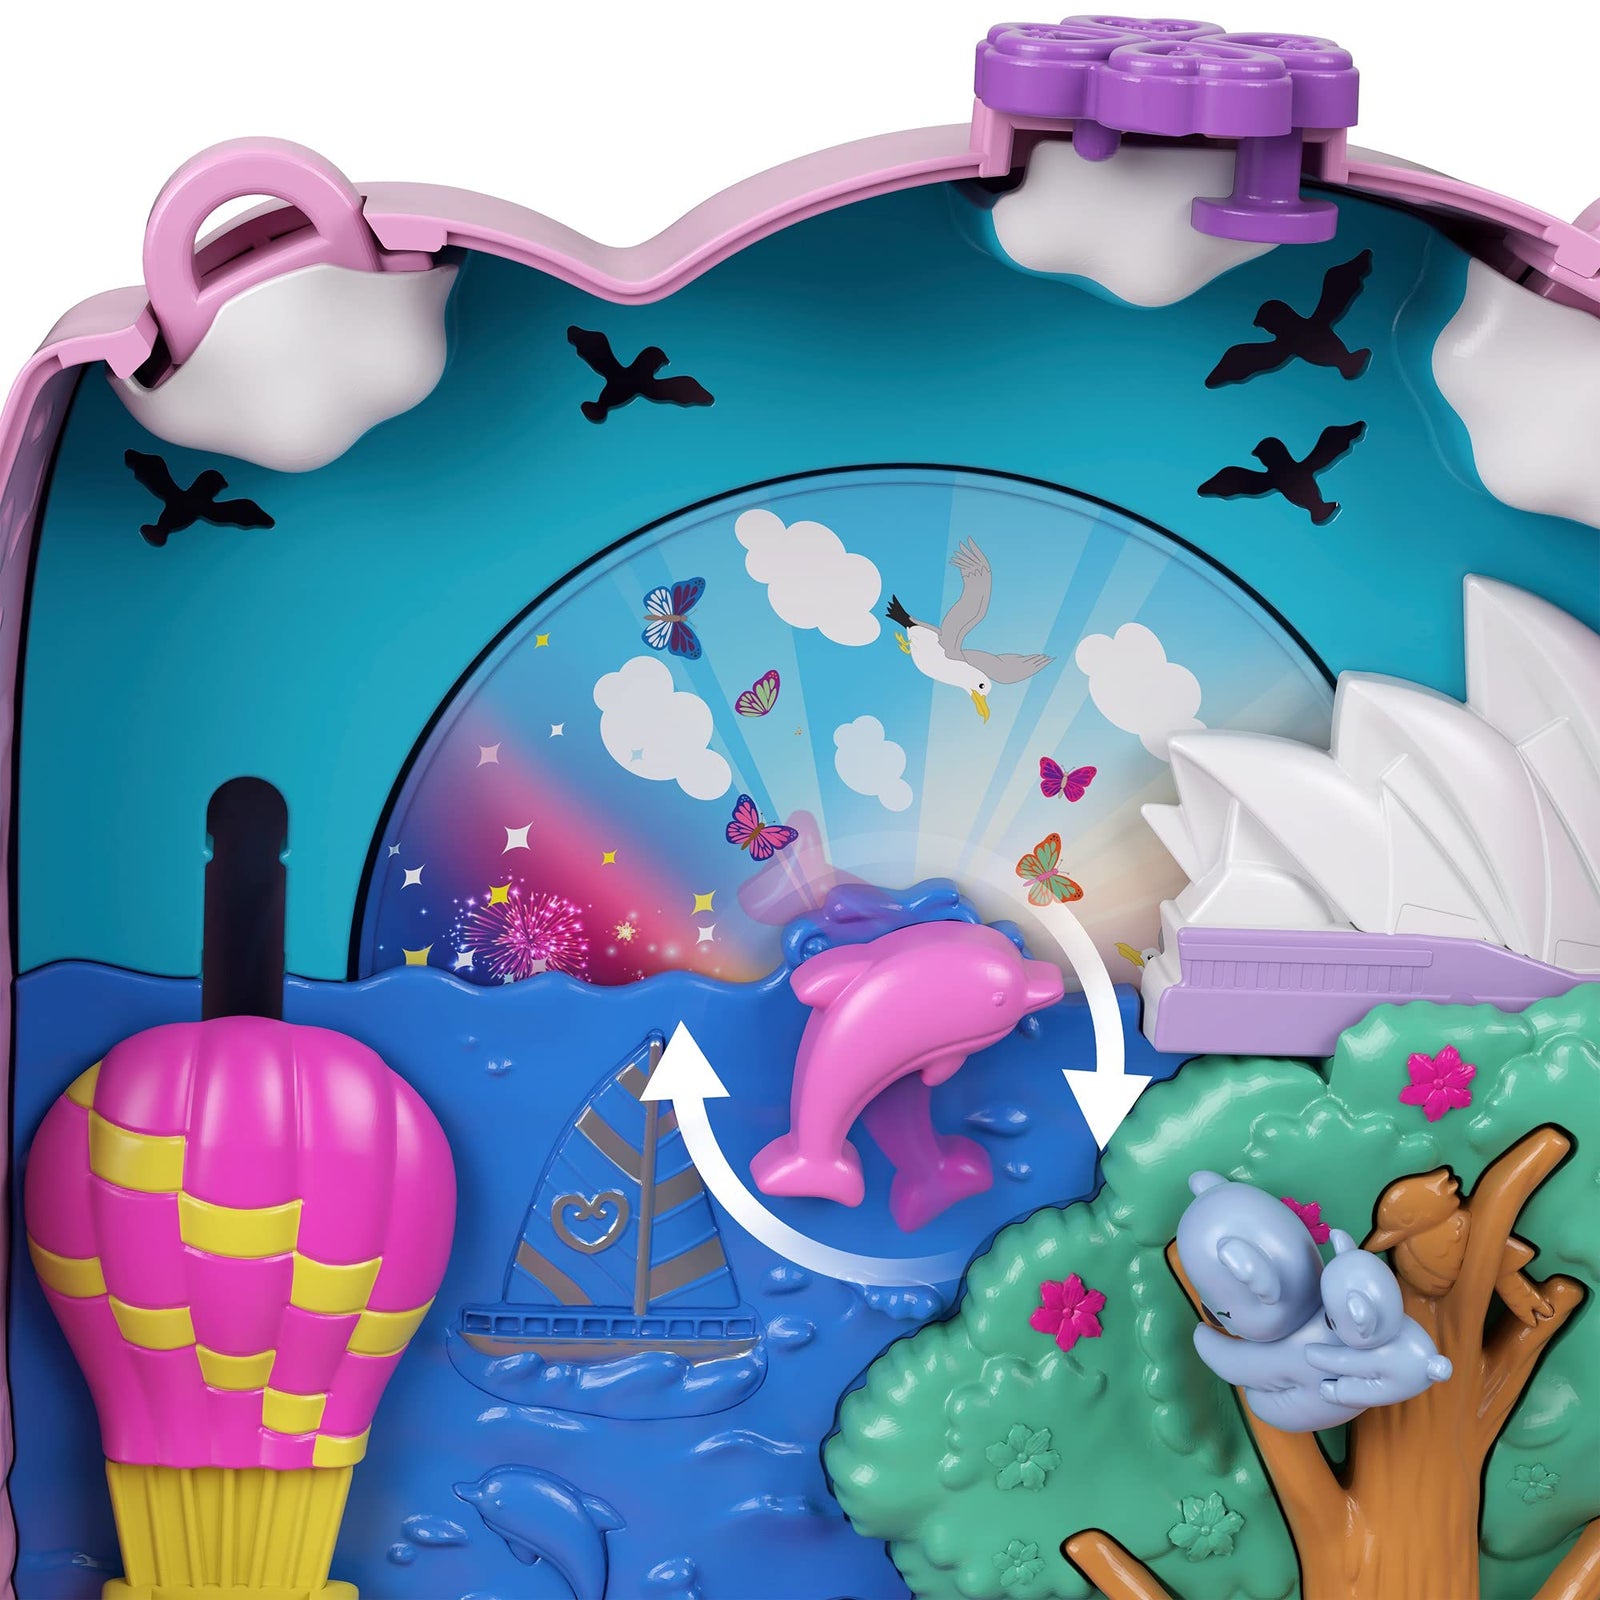 Polly Pocket Koala Adventures Wearable Purse Compact with Micro Polly Doll & Friend Doll, 8 Outdoor-Related Features, 5 Animals & Removable Vehicle Accessory, Great Gift for Ages 4 Years Old & Up